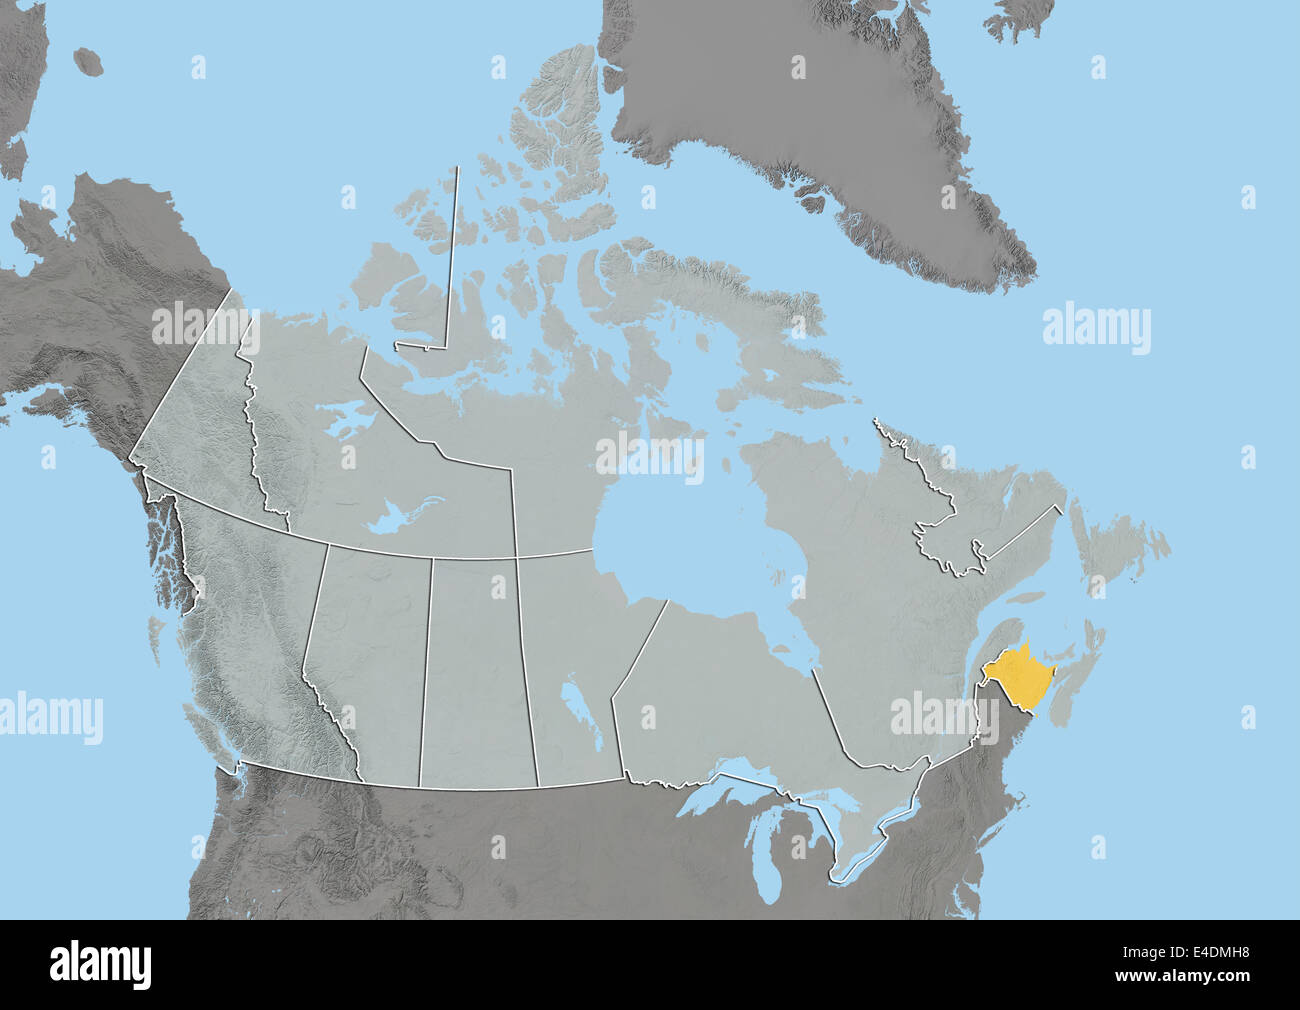 Province of New Brunswick, Canada, Relief Map Stock Photo